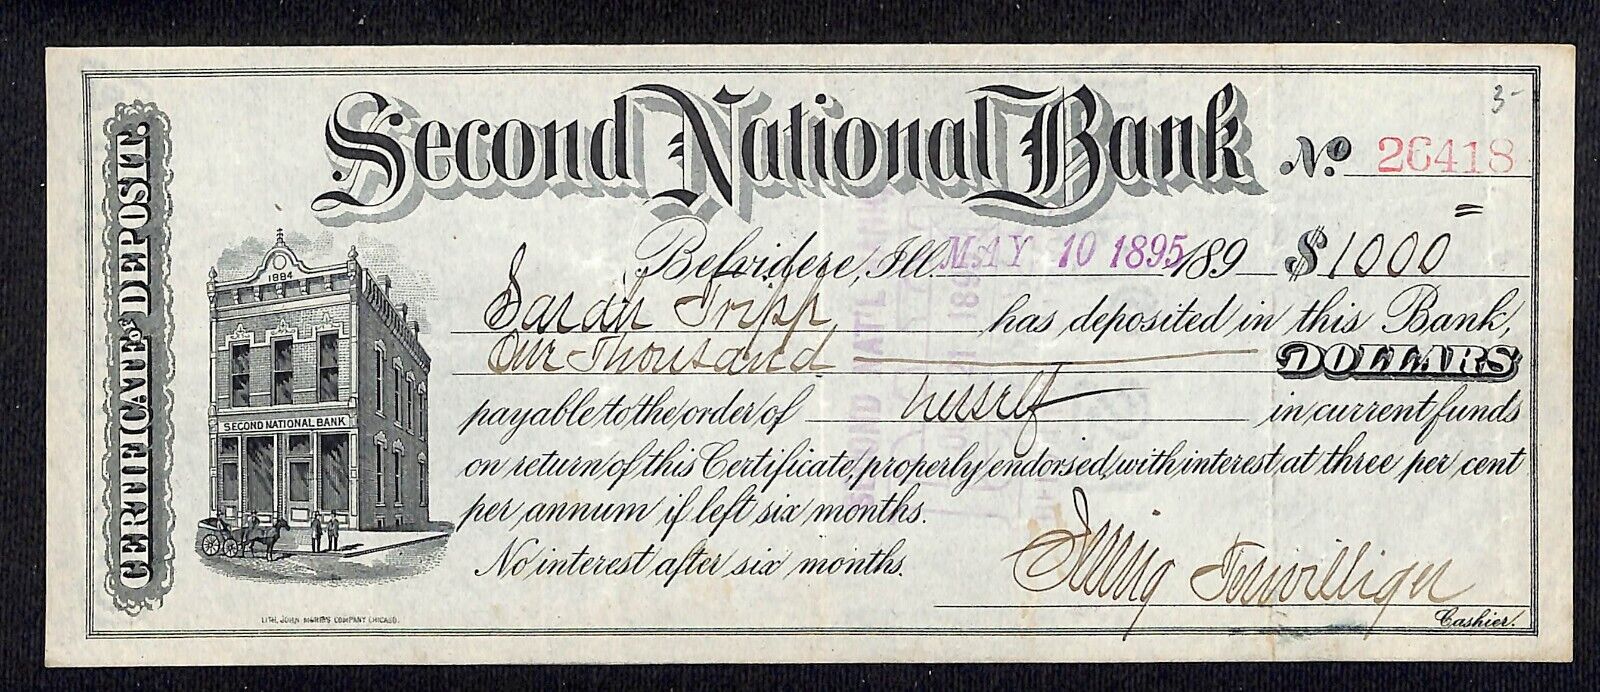 Belvidere, IL 1895 Second National Bank $1,000 Certificate of Deposit - Scarce